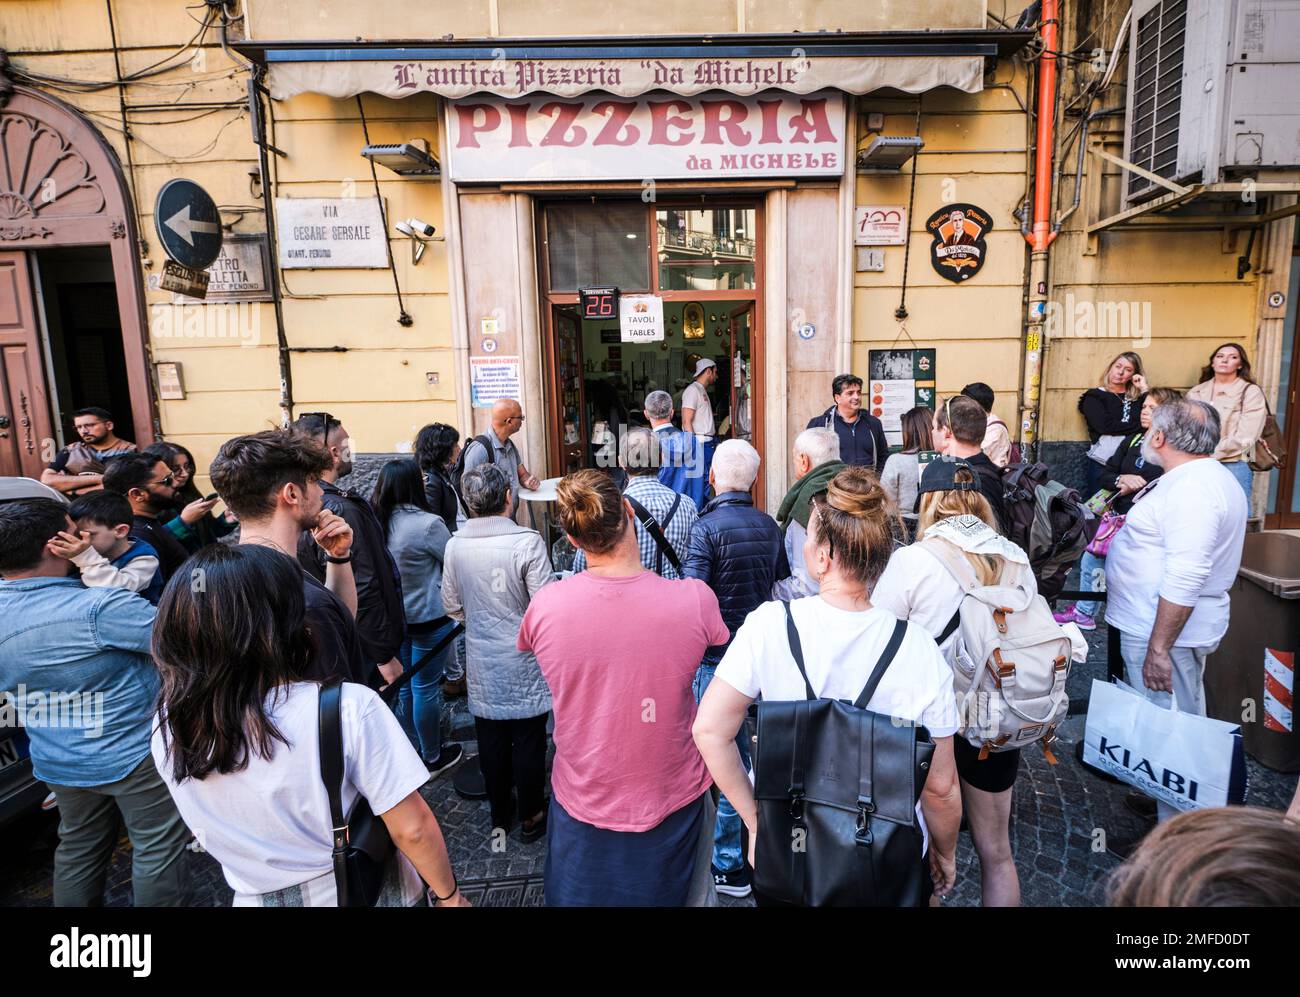 A crowd of people wait for a table at Pizzeria da Michele, made famous by the book, Eat, Pray, Love, by Elizabeth Gilbert. Julia Roberts starred in th Stock Photo